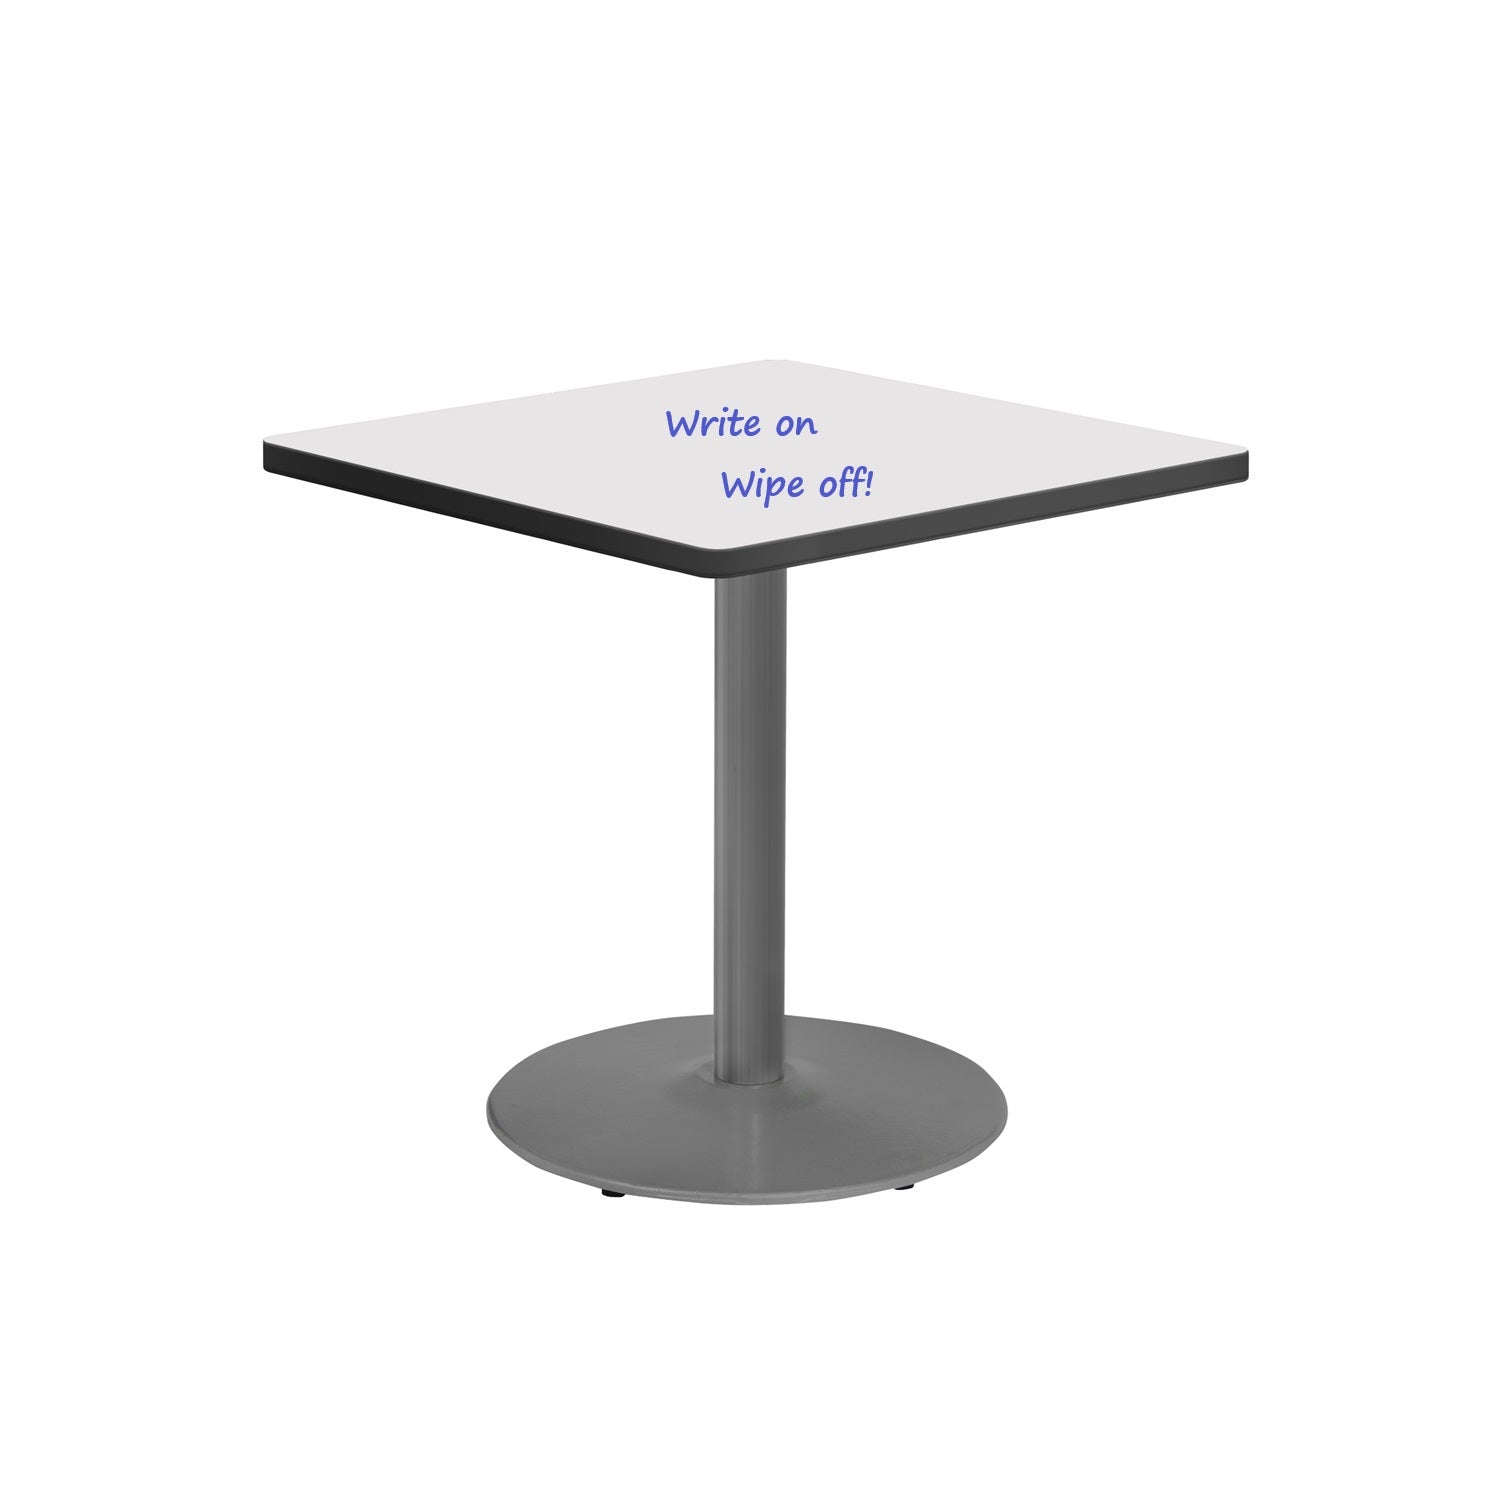 30" Square Sitting Height Café Table with Dry-Erase Laminate Markerboard Top